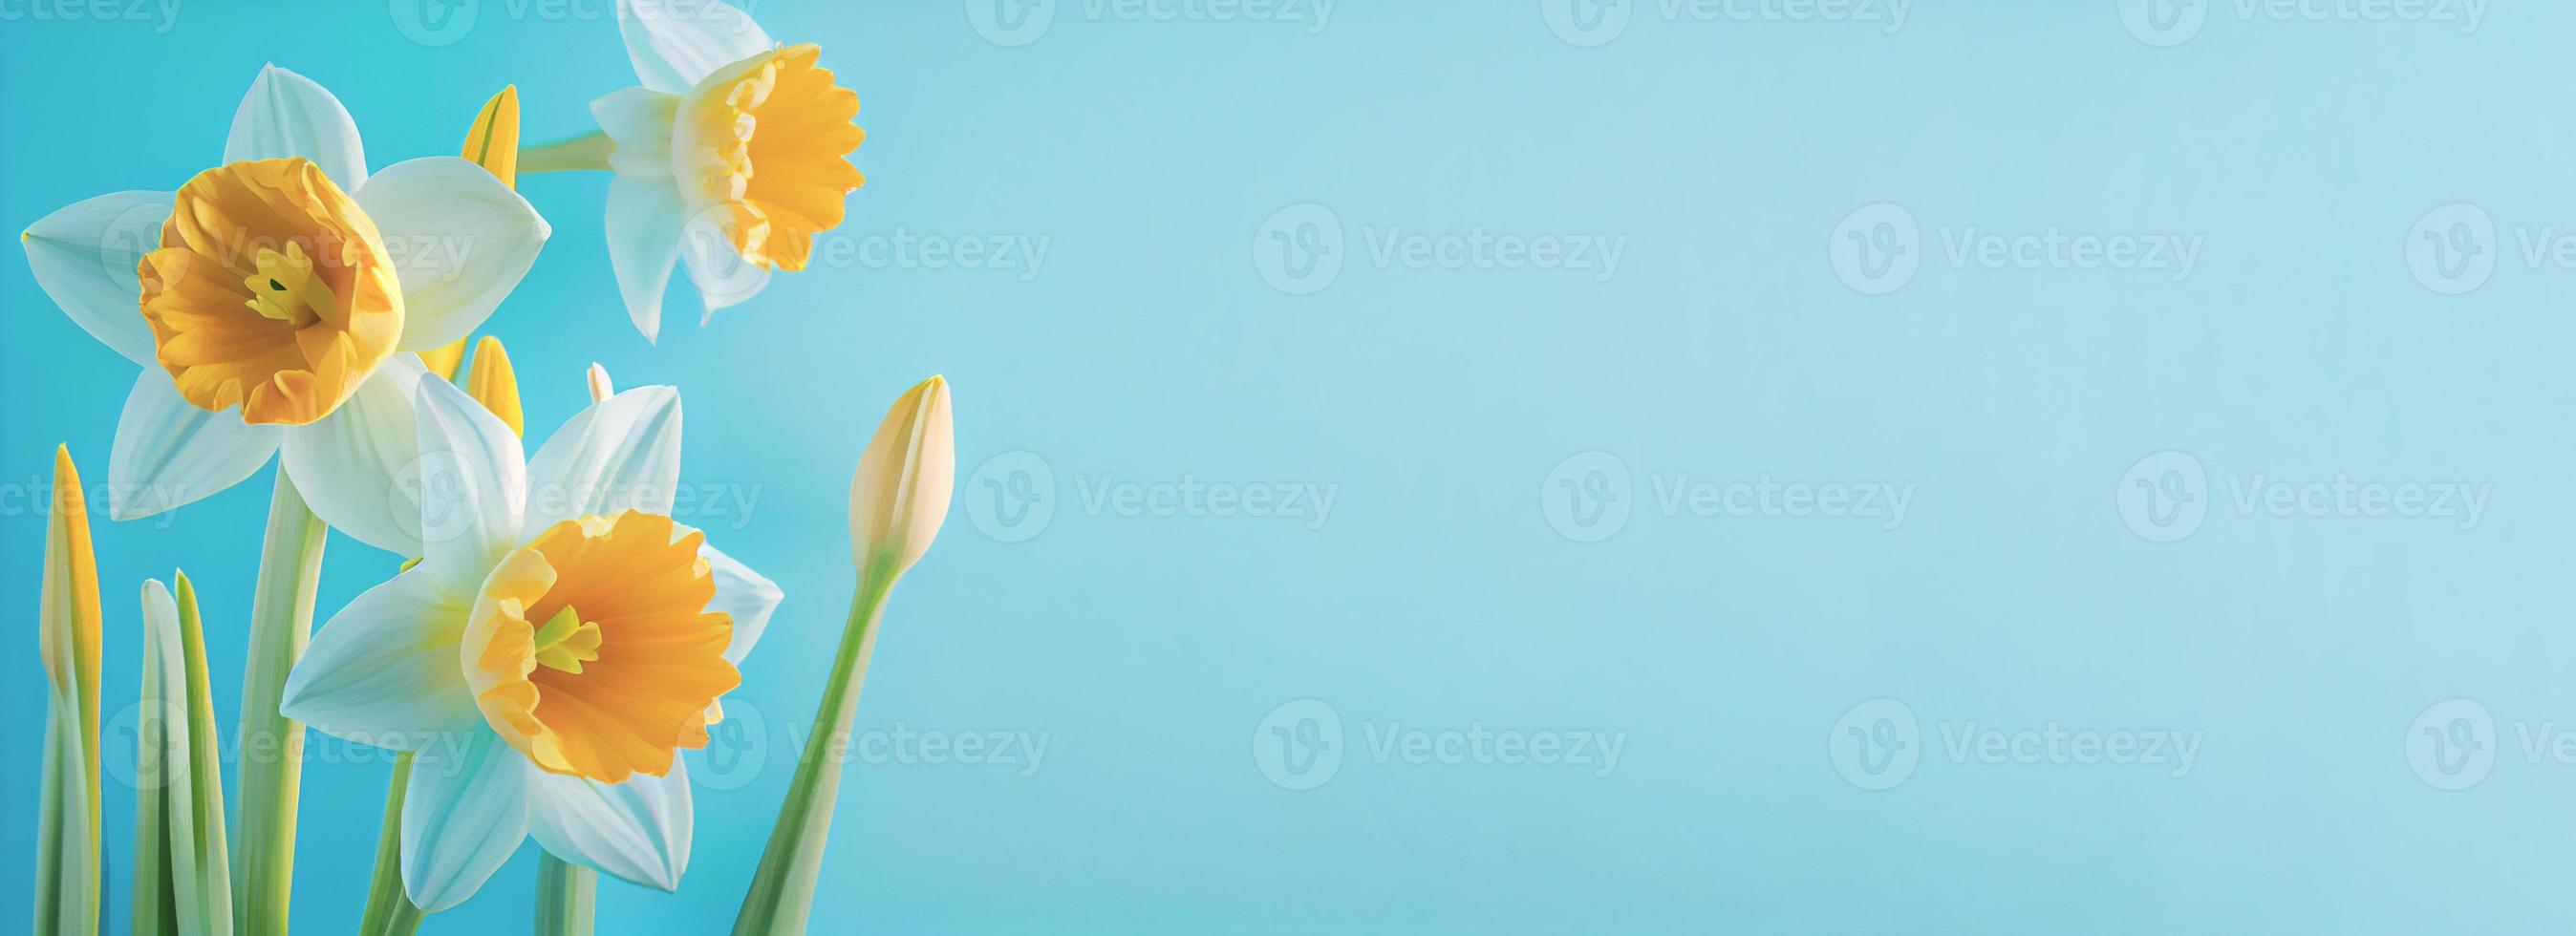 Spring easter background with top view of daffodils bouquet on light blue background with copy space photo